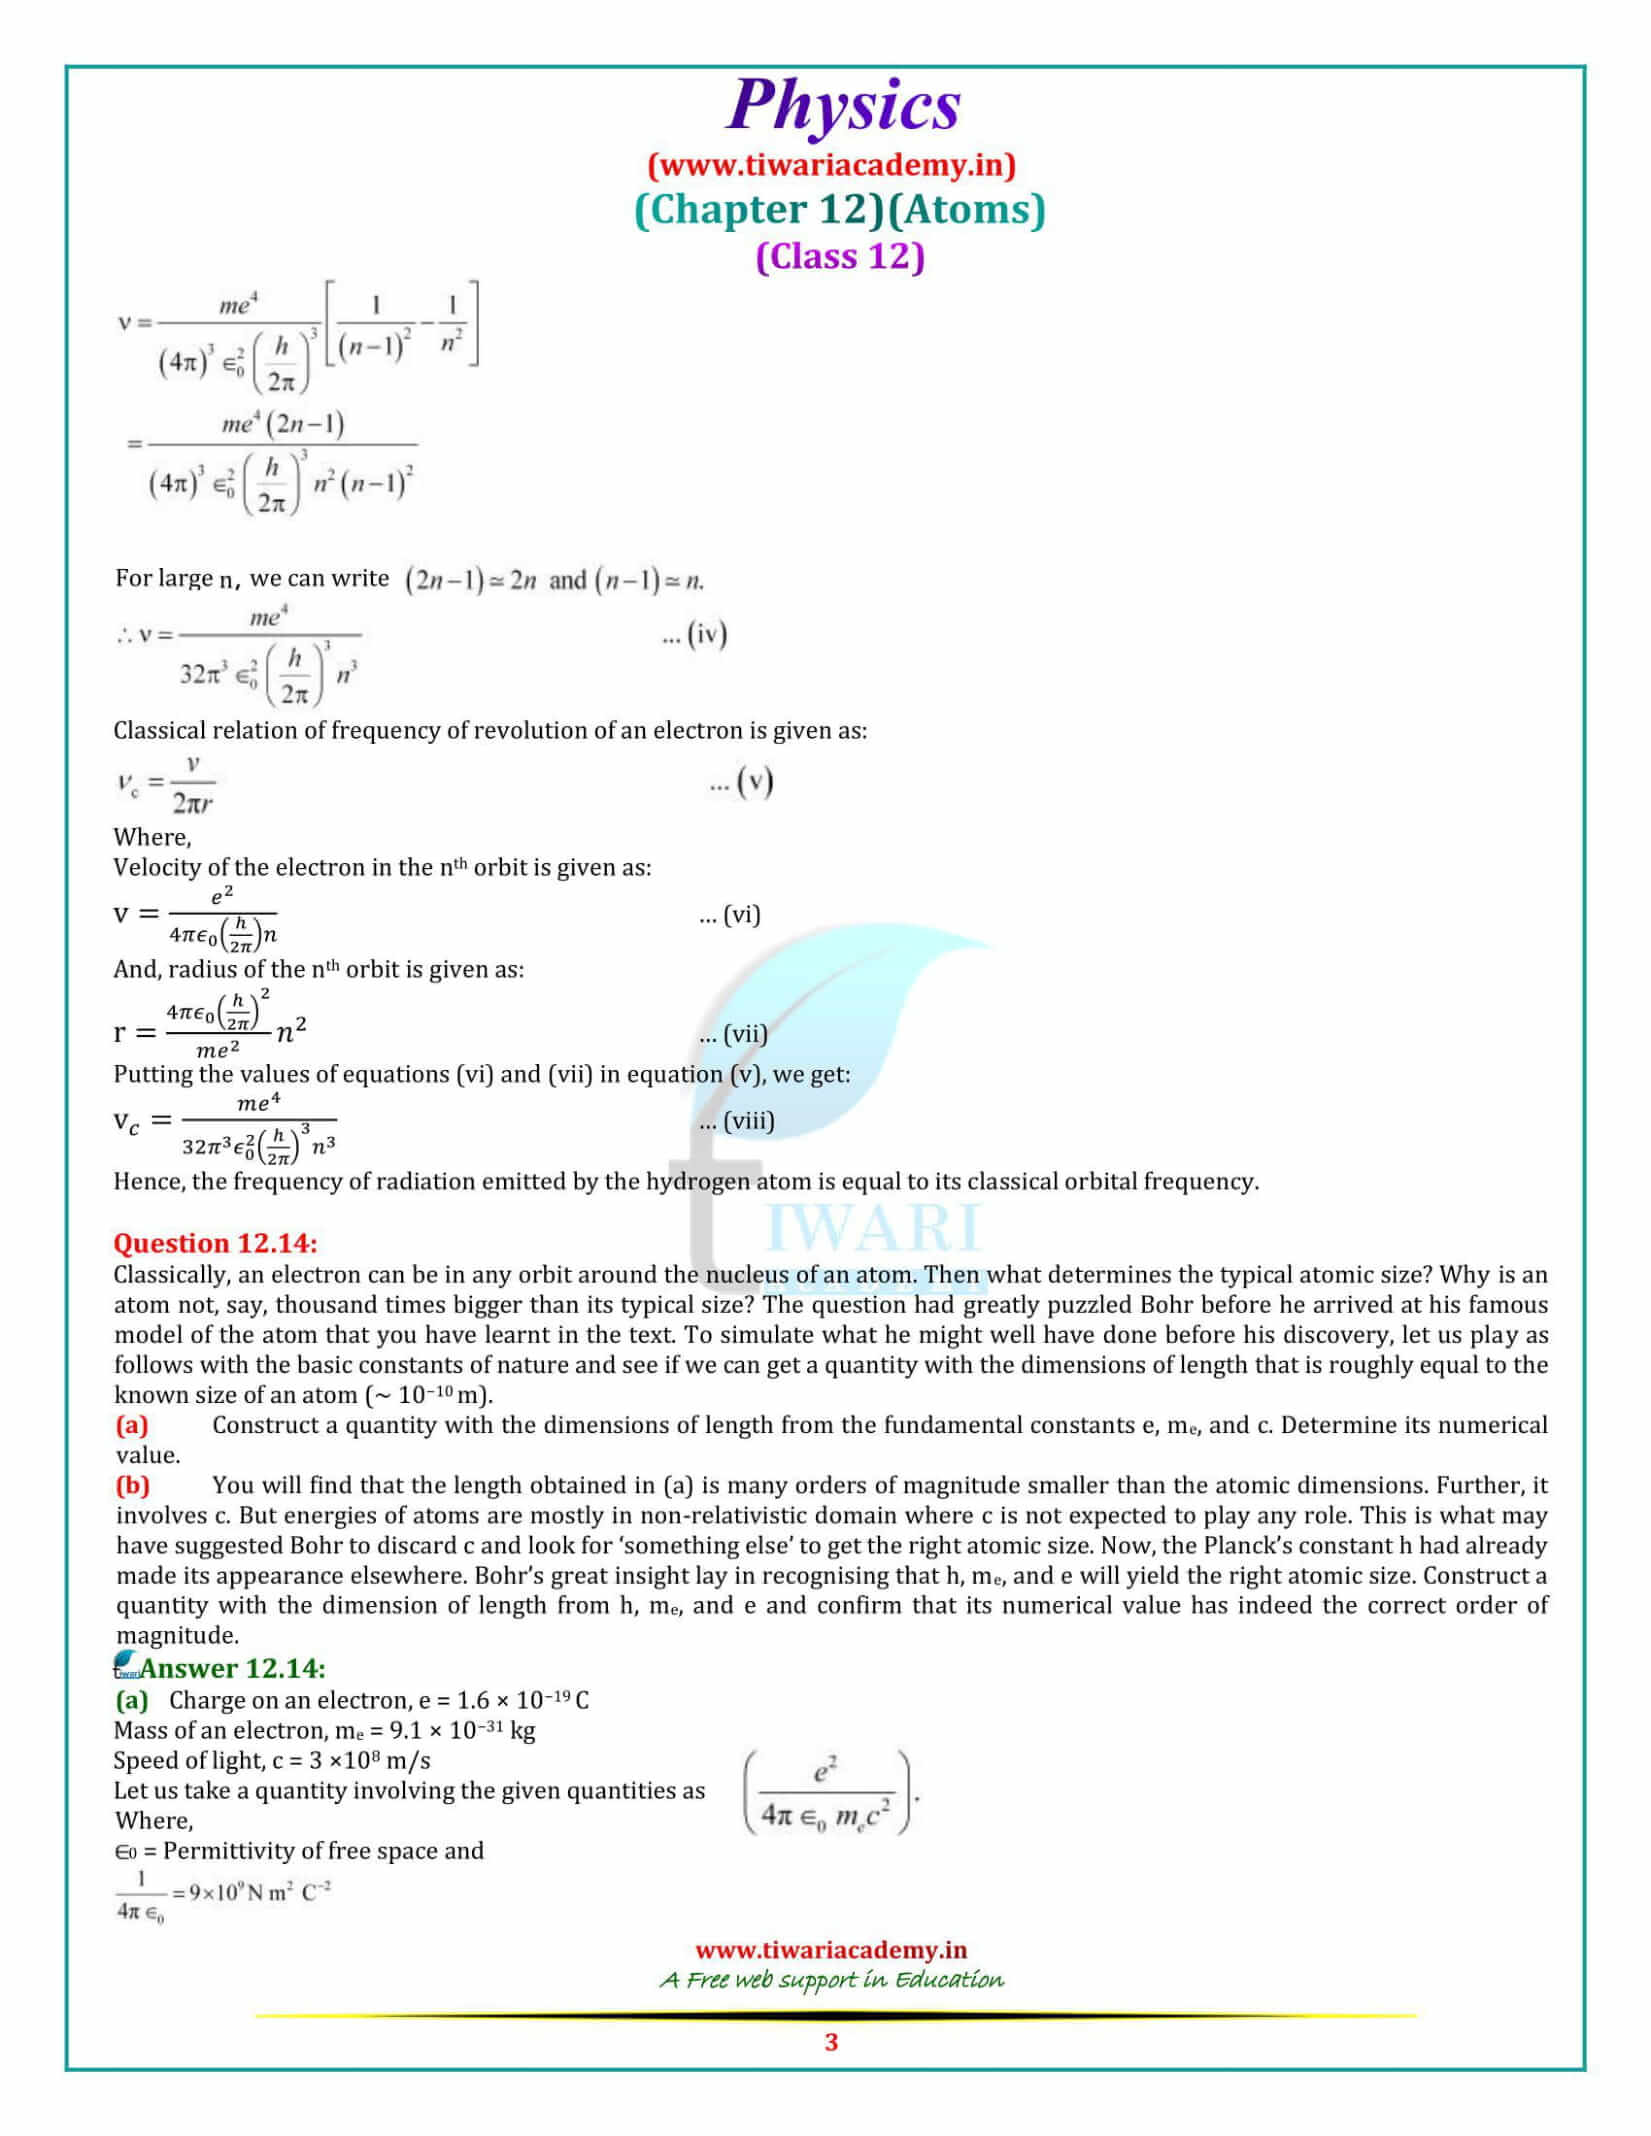 12 Physics Chapter 12 Atom additional exercises answers in free pdf